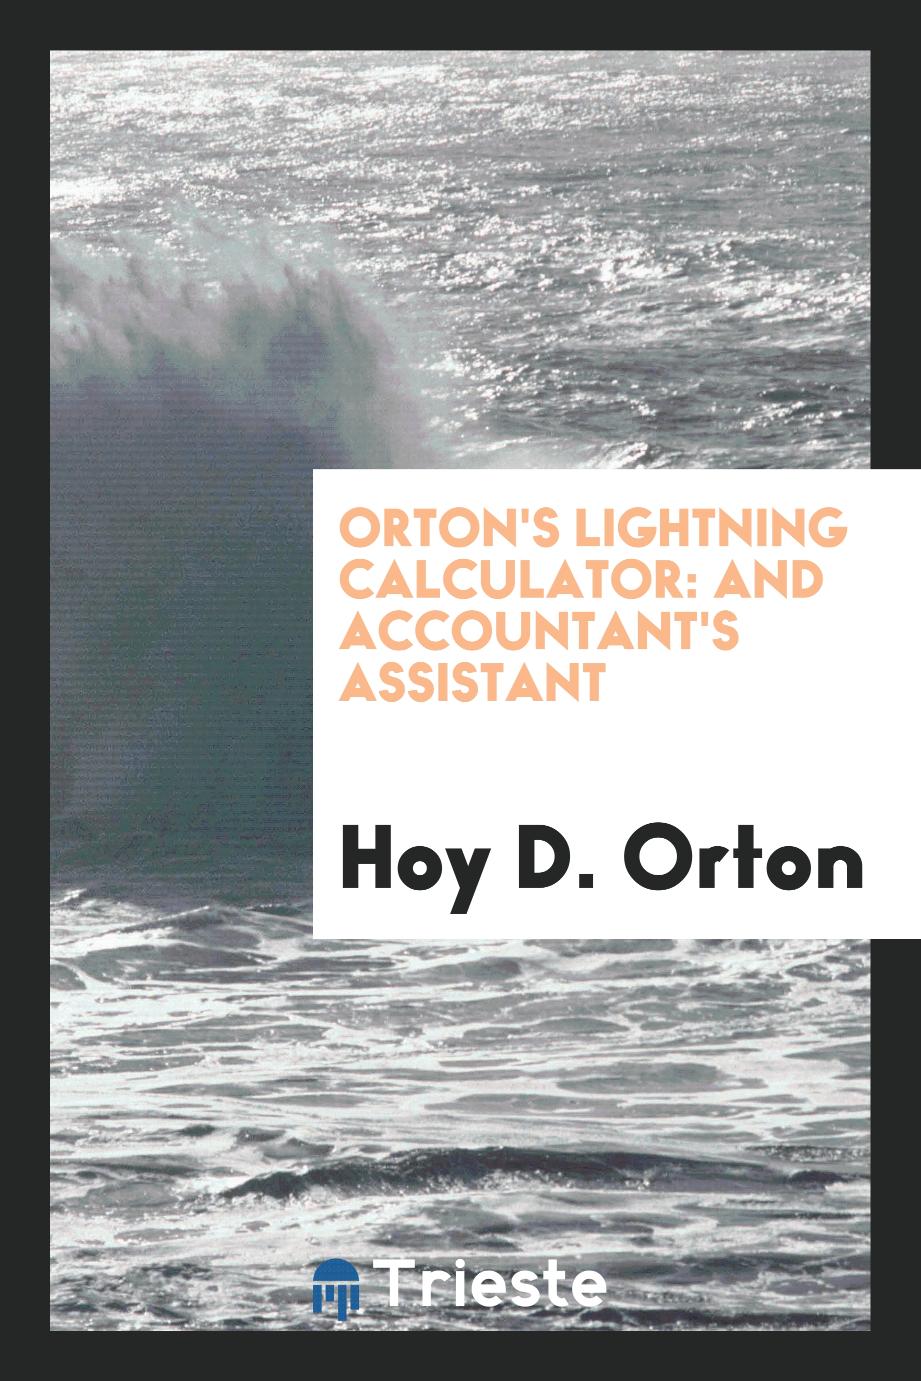 Orton's lightning calculator: and accountant's assistant